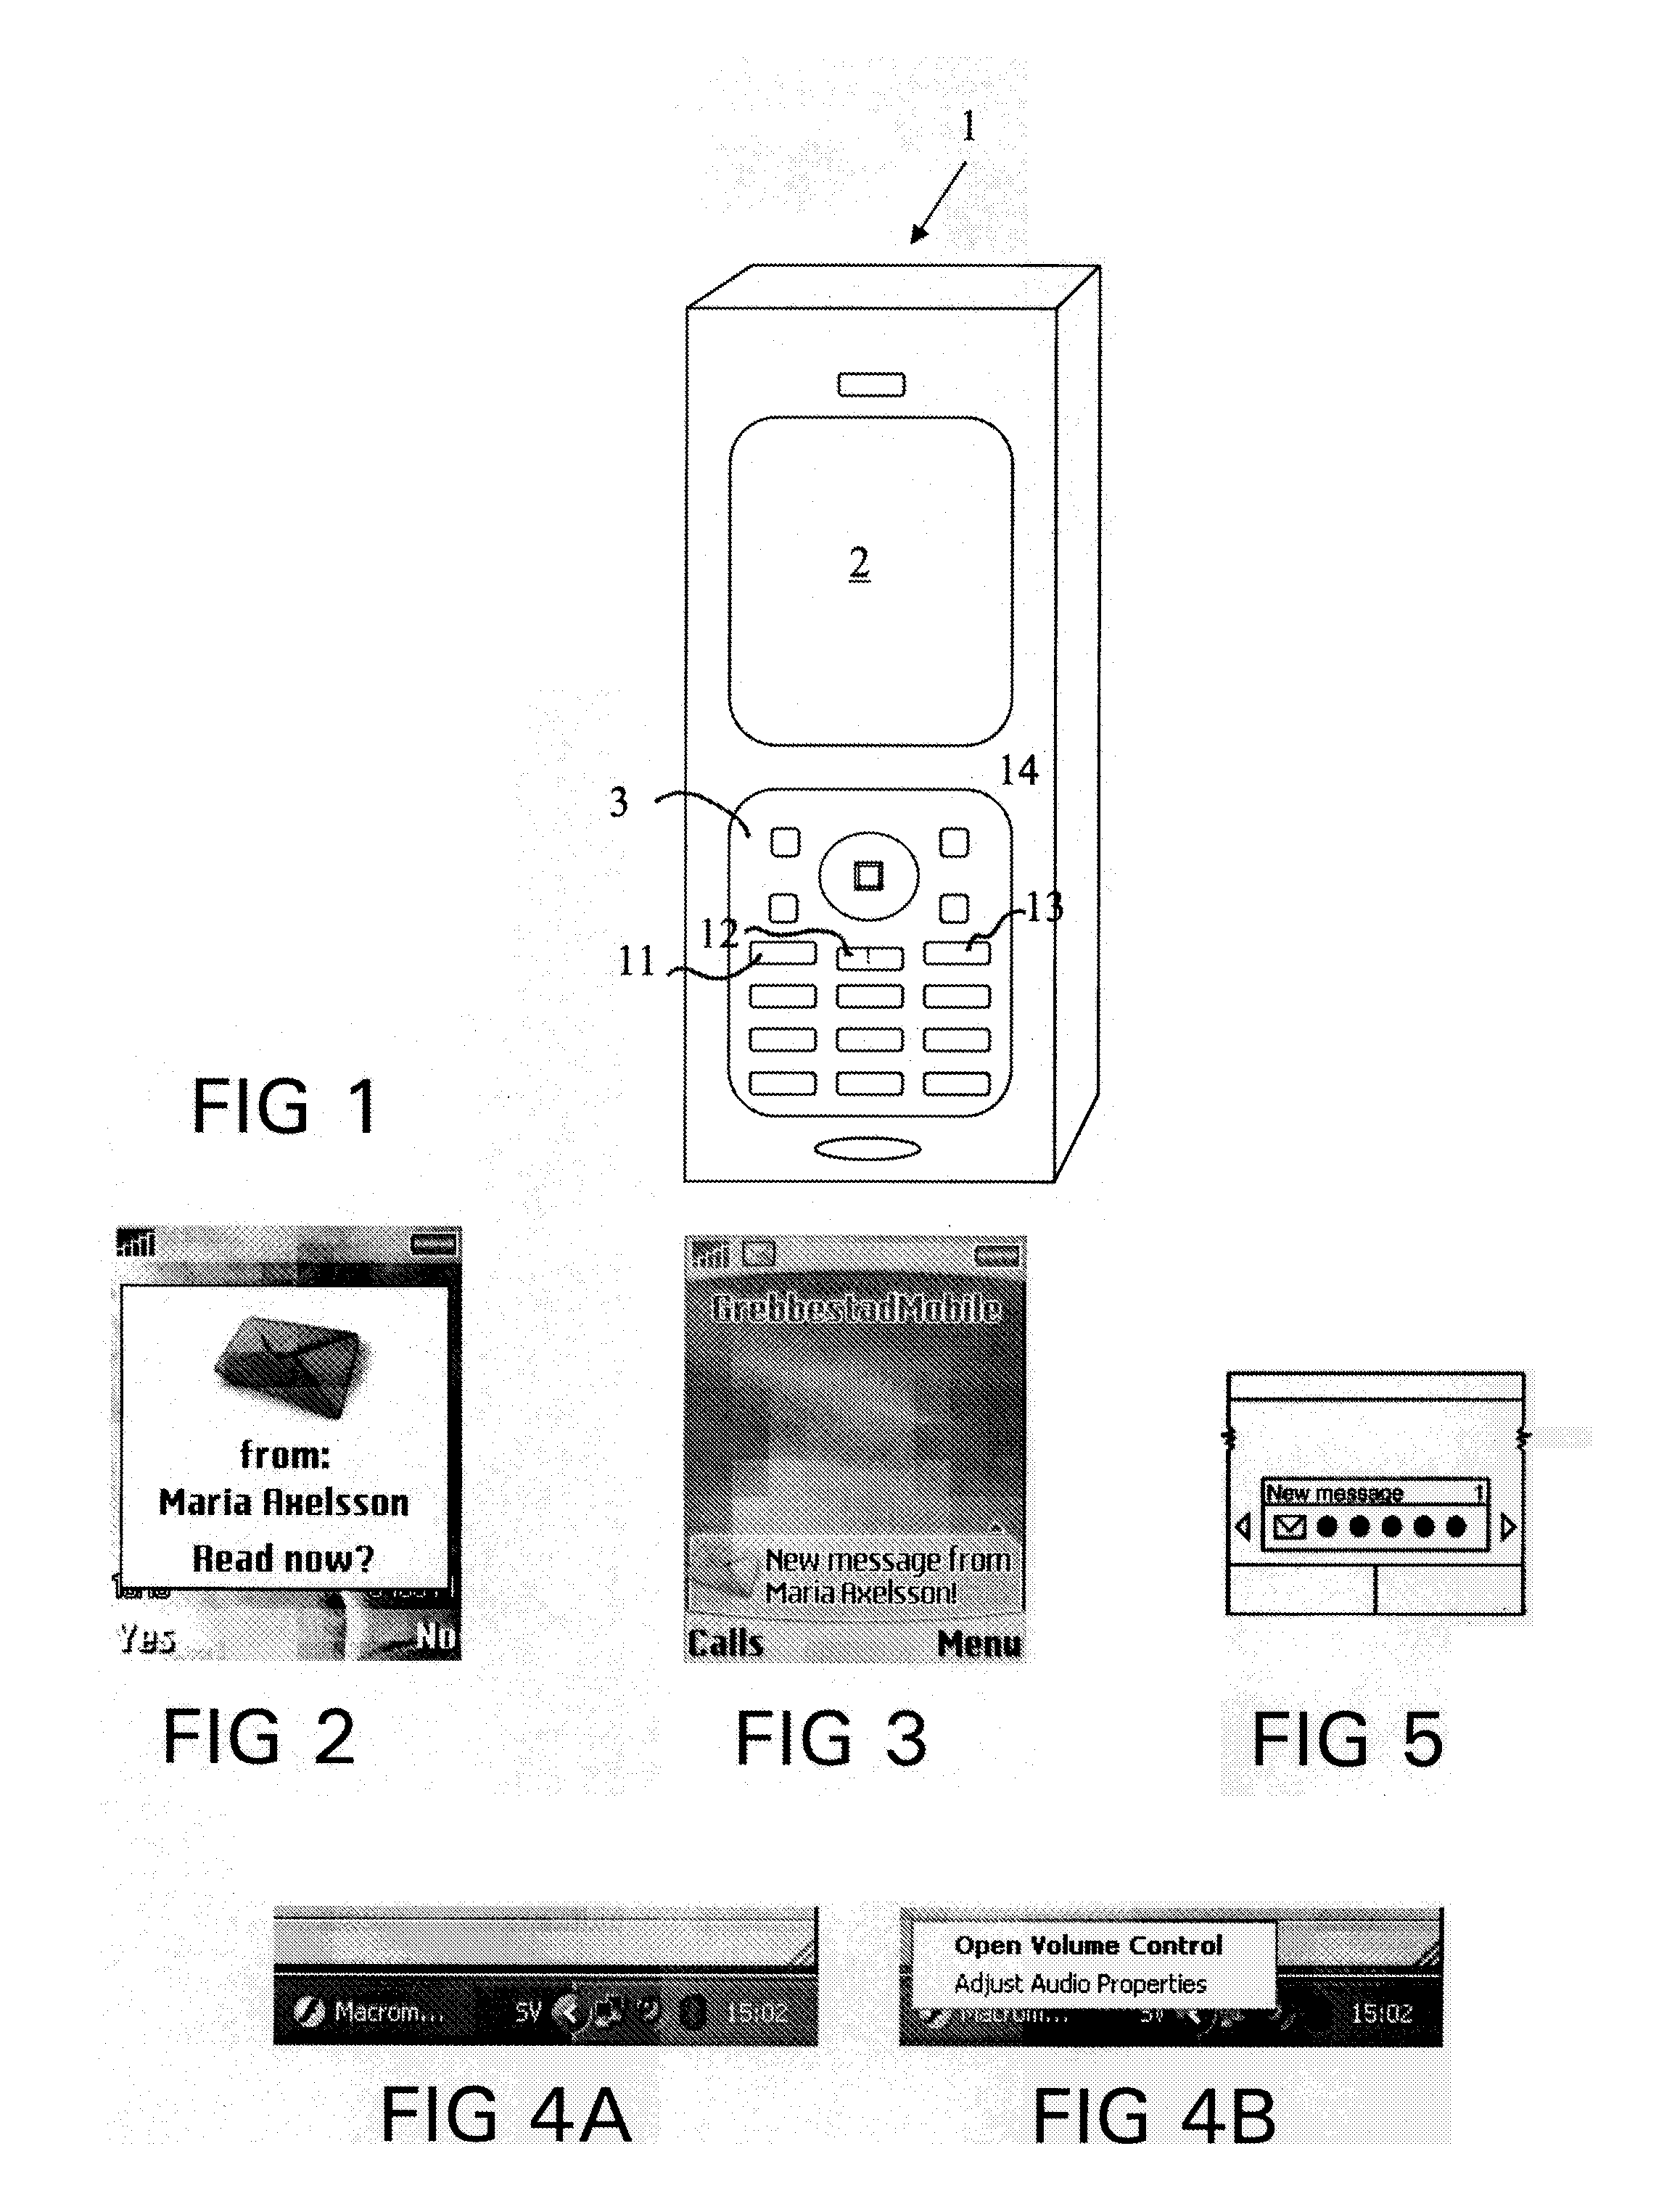 Method for Providing Alerts in a Mobile Device and Mobile Device Therefor